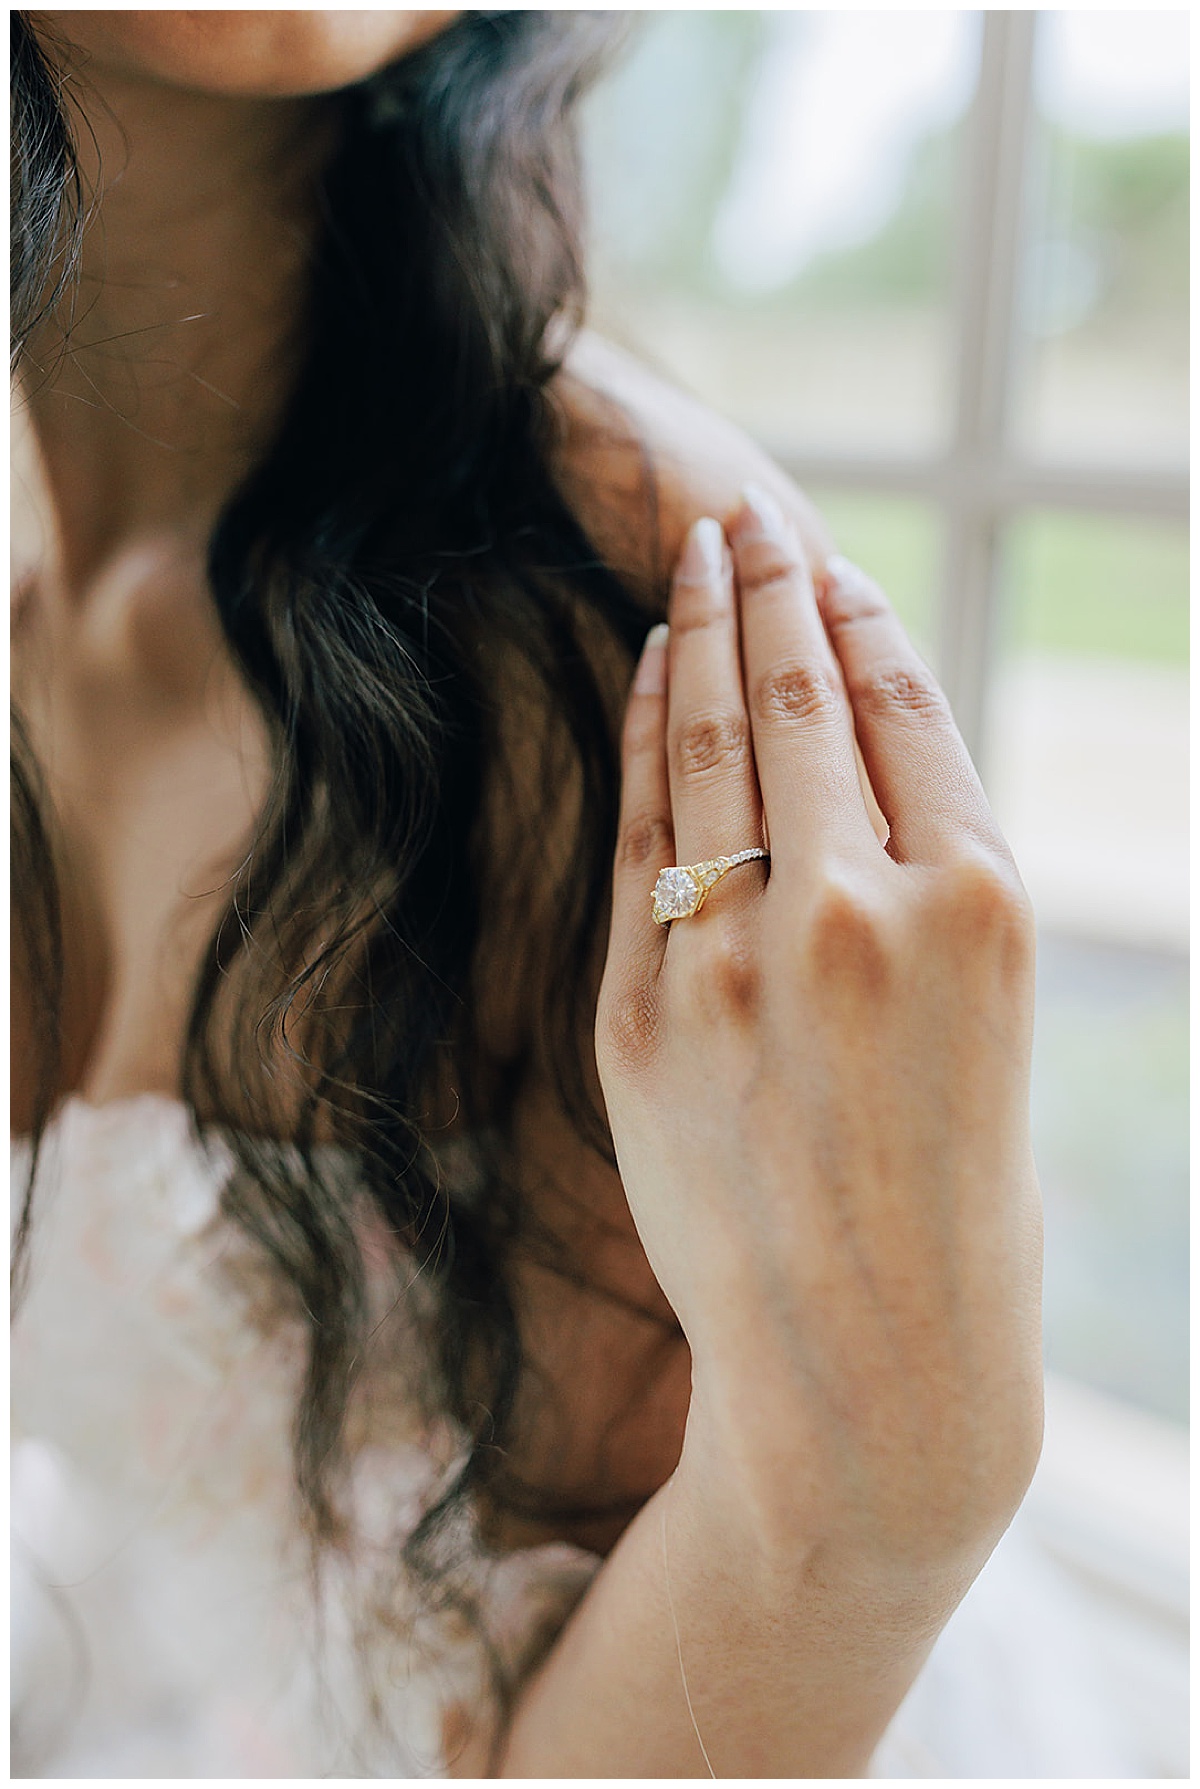 Making The Switch To Full-Day Wedding Packages to capture every detail like this stunning wedding ring